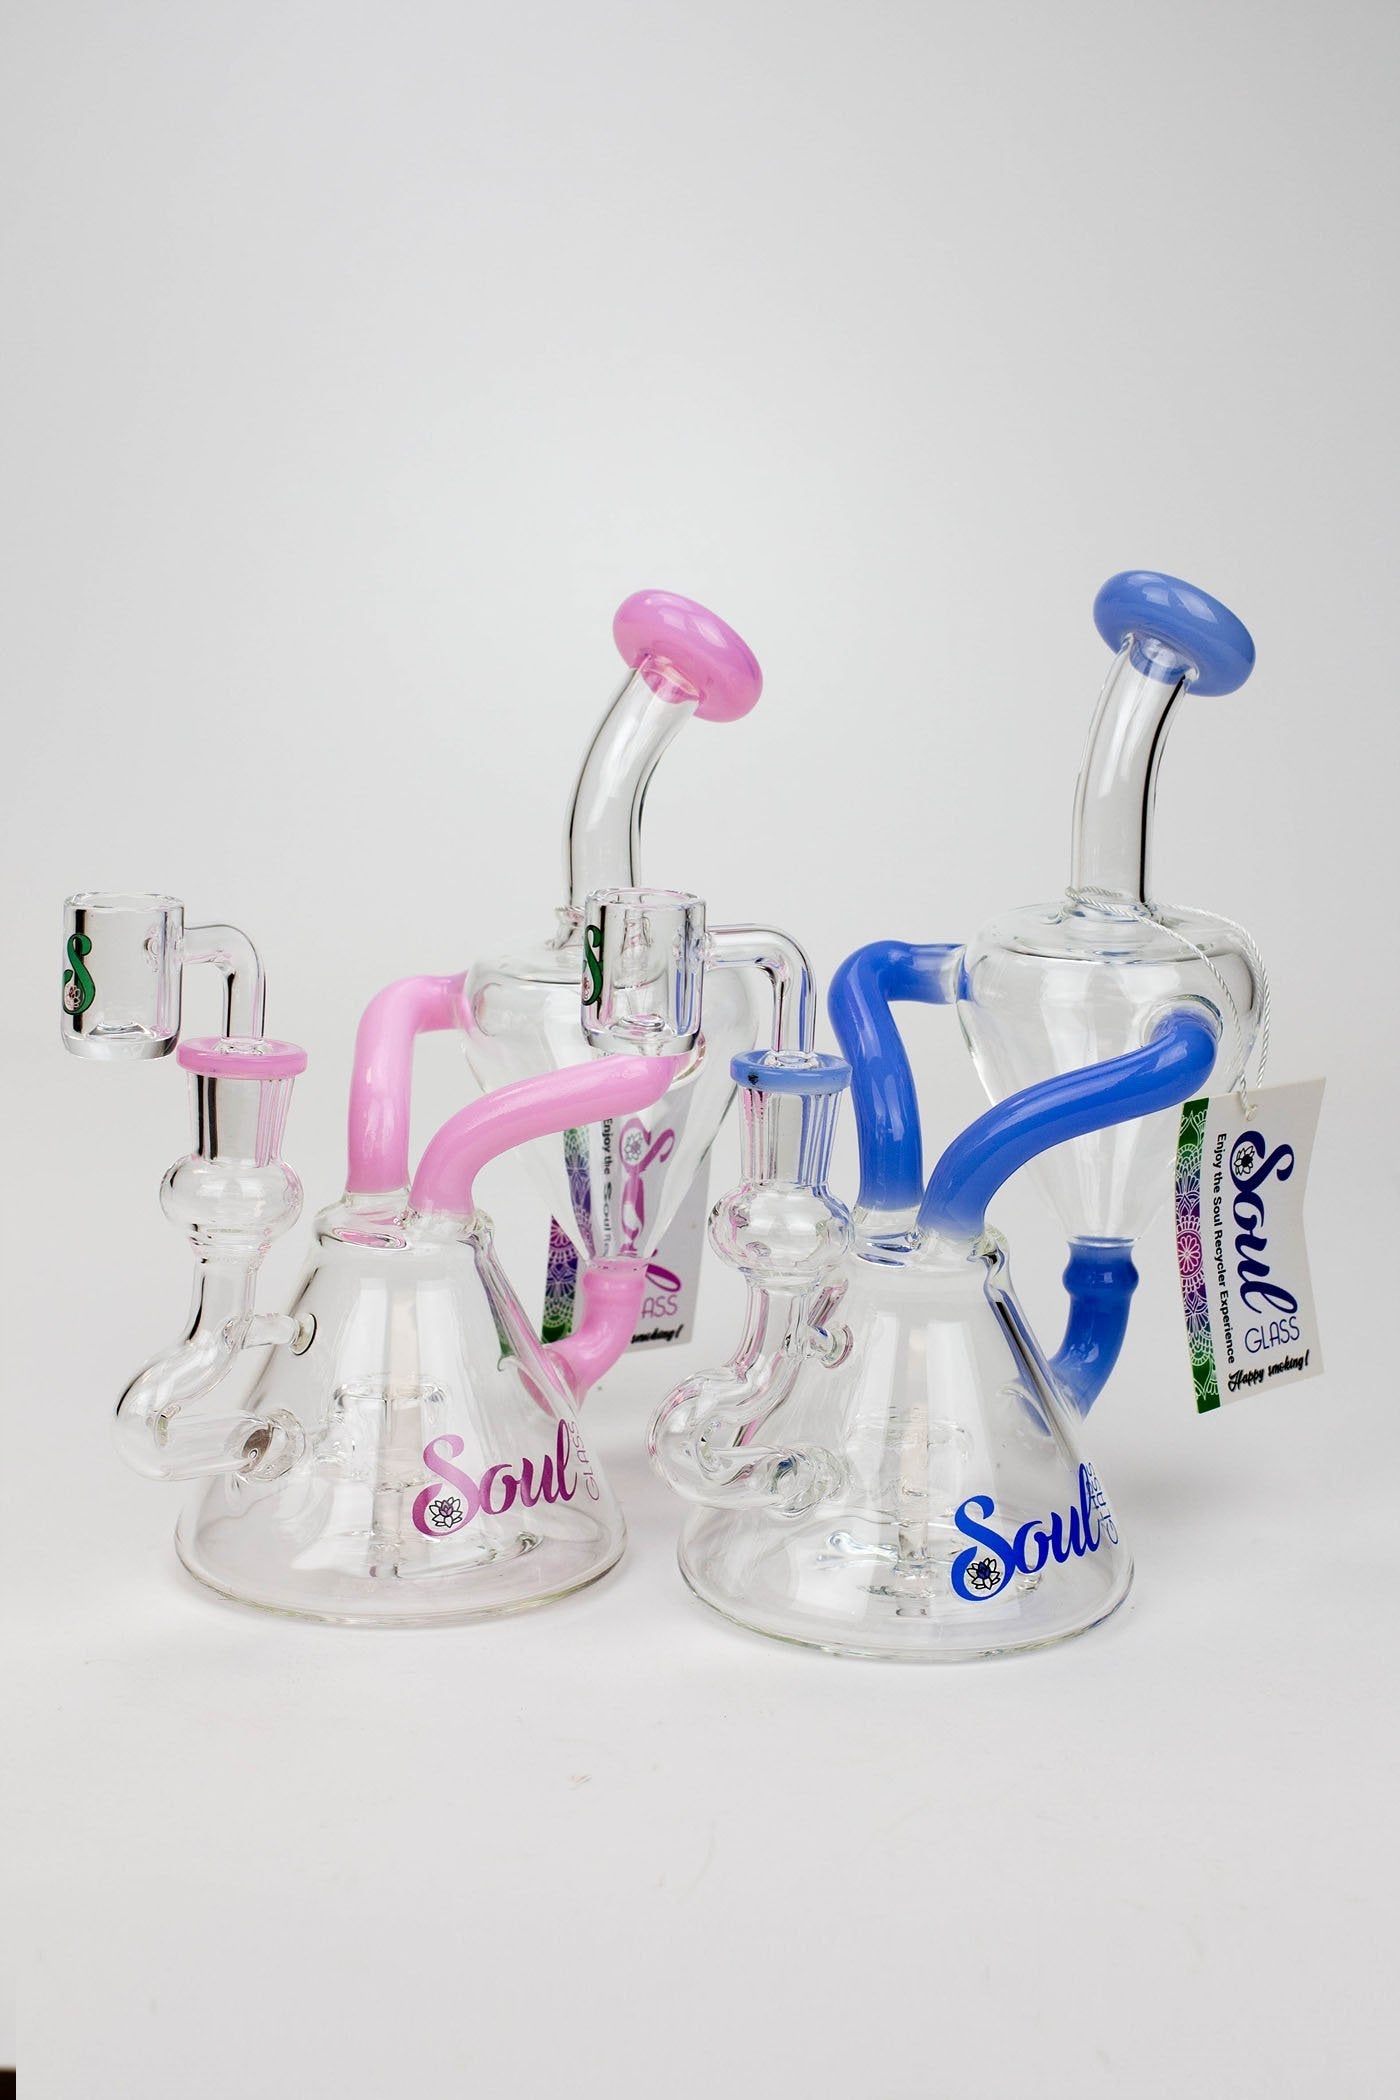 8" SOUL Glass 2-in-1 single chamber recycler bong_0